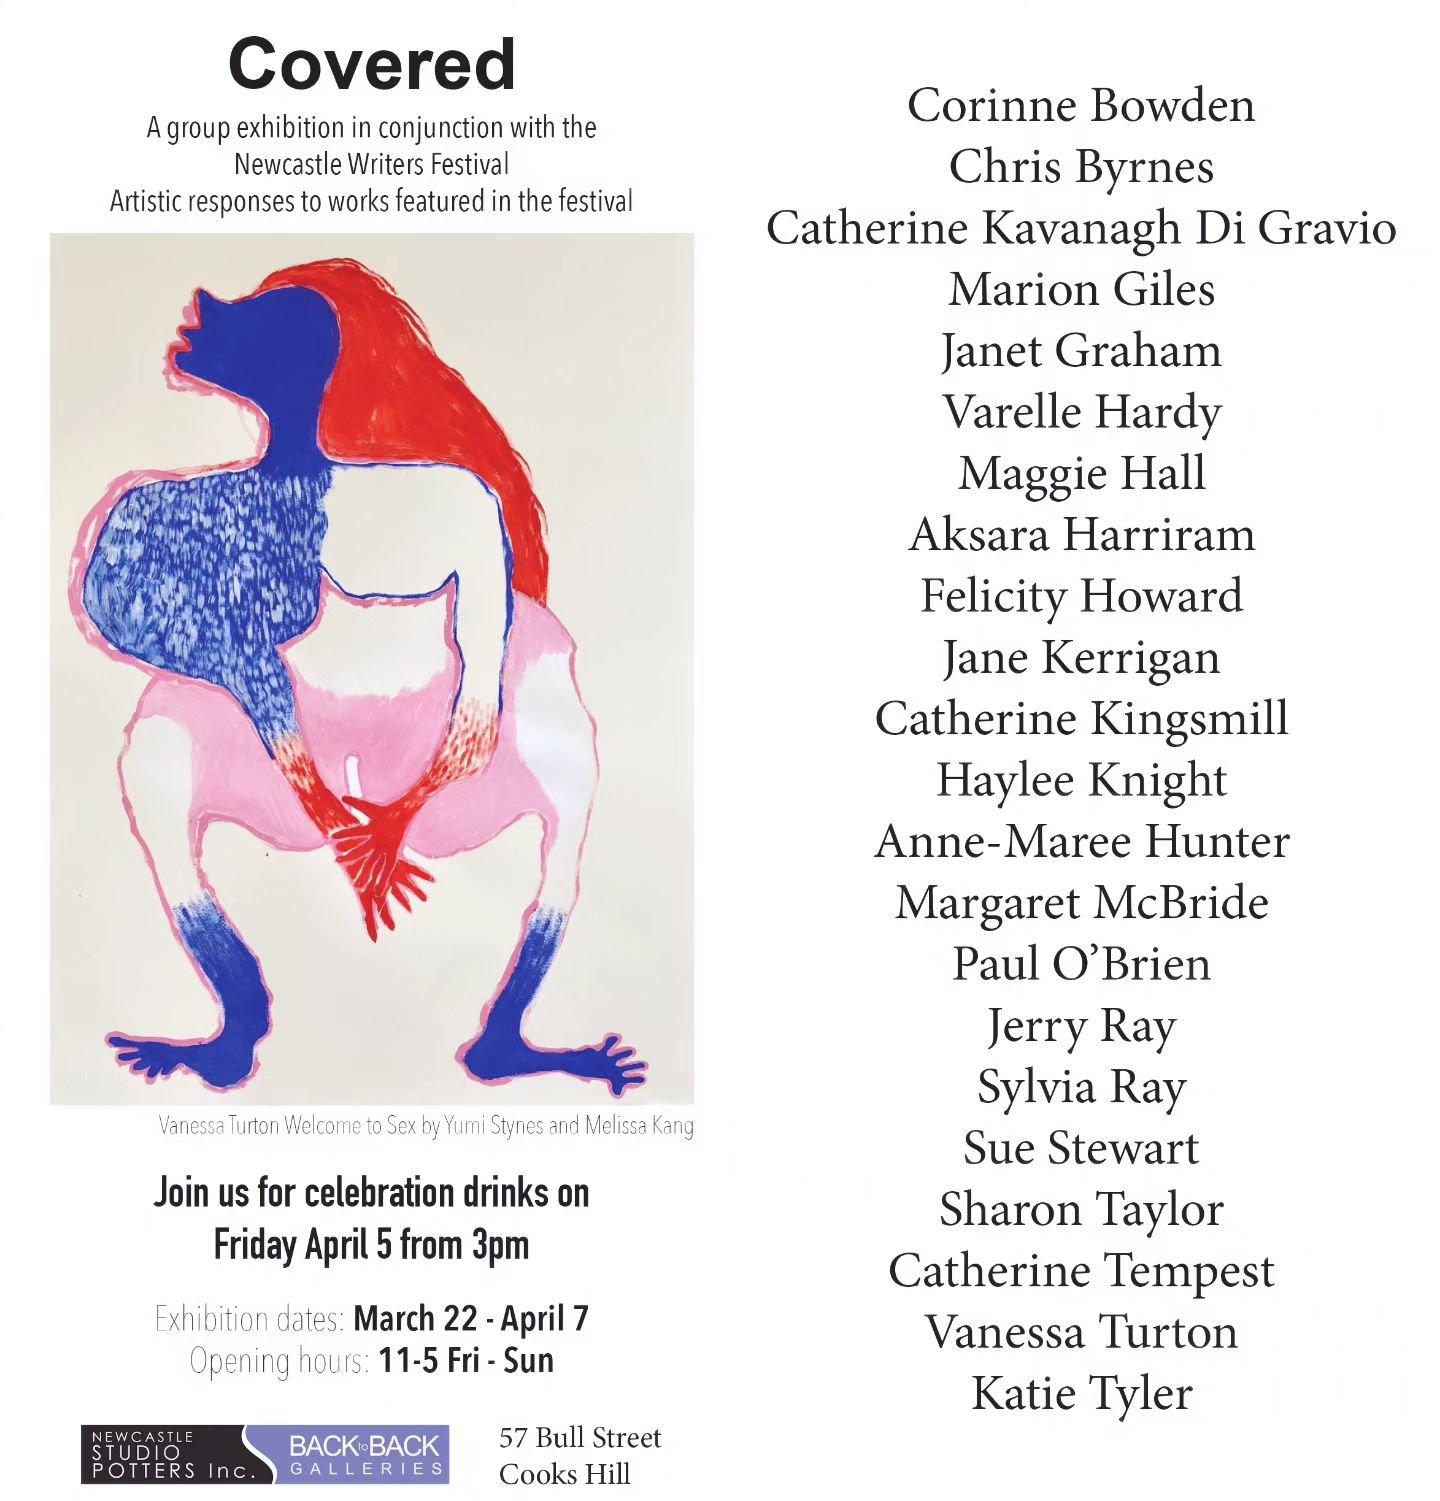 So excited to be part of 'Covered' an exhibition for the @newcastlewritersfestival. Exhibition runs @newcastle_studio_potters from 22 March - 7 April. Celebratory drinks will be on the 5th of April from 3pm.

@corrine.bowden
@lady_camera_obscura
@kit